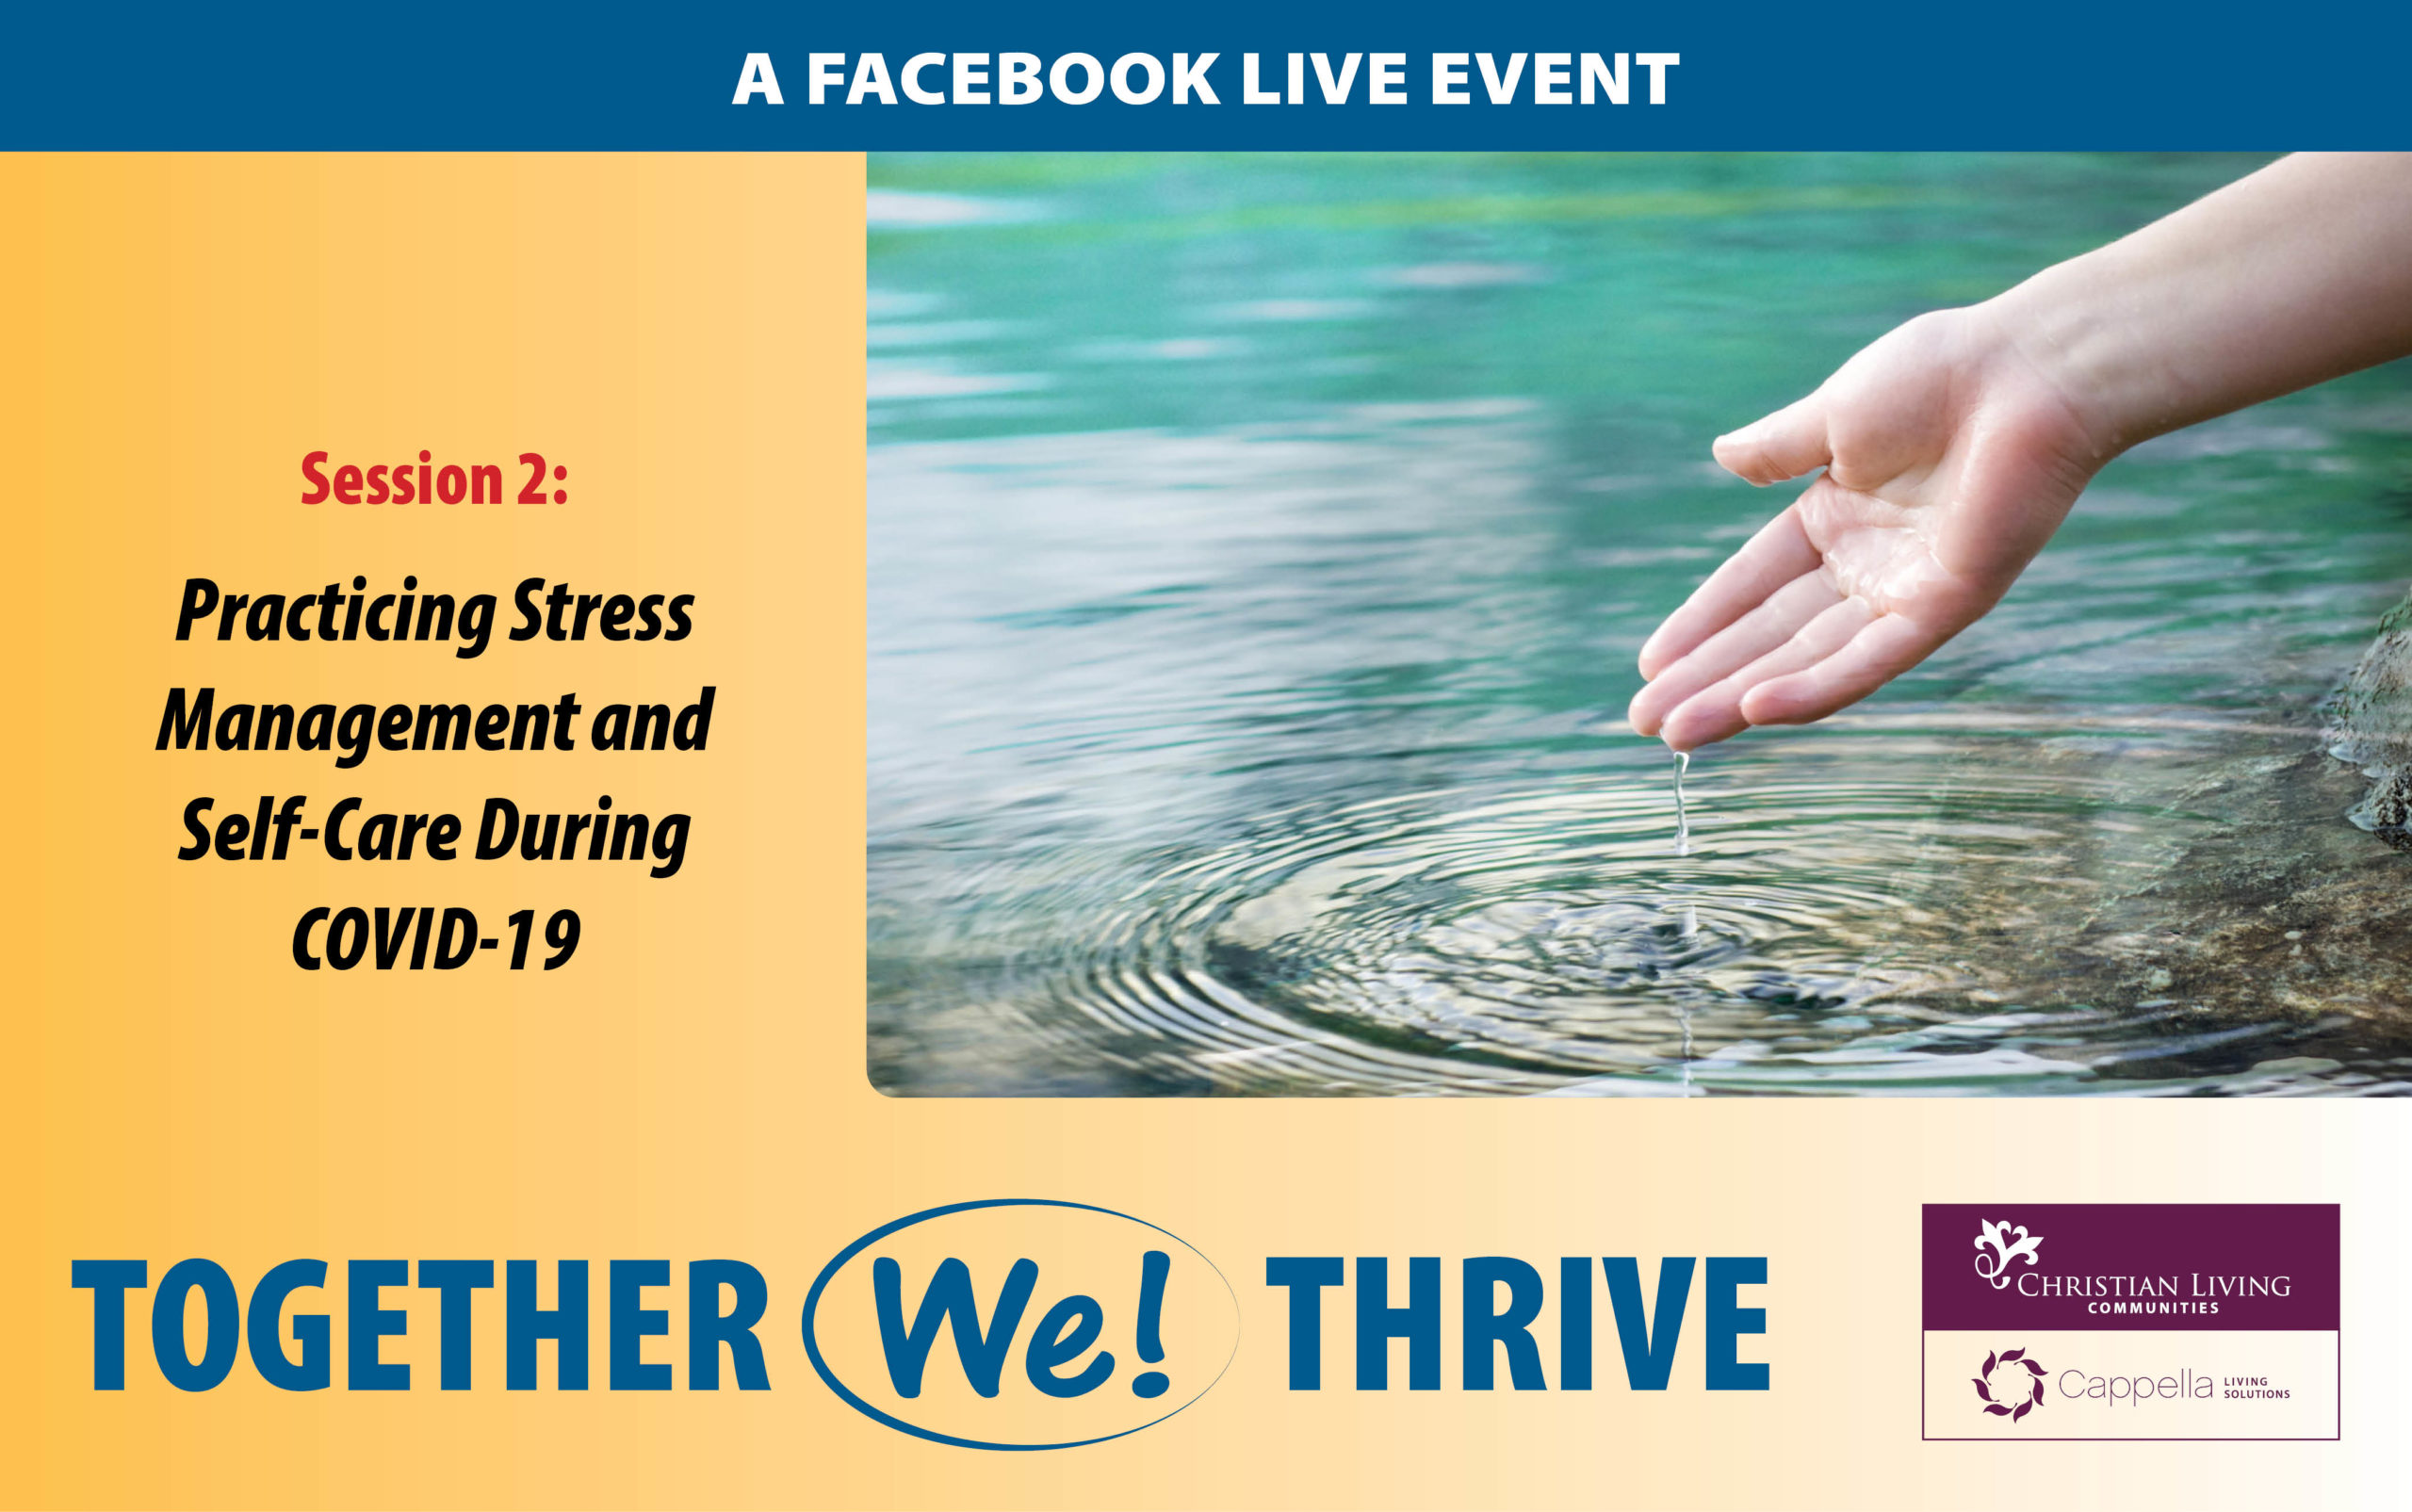 Together we thrive event - 2nd session